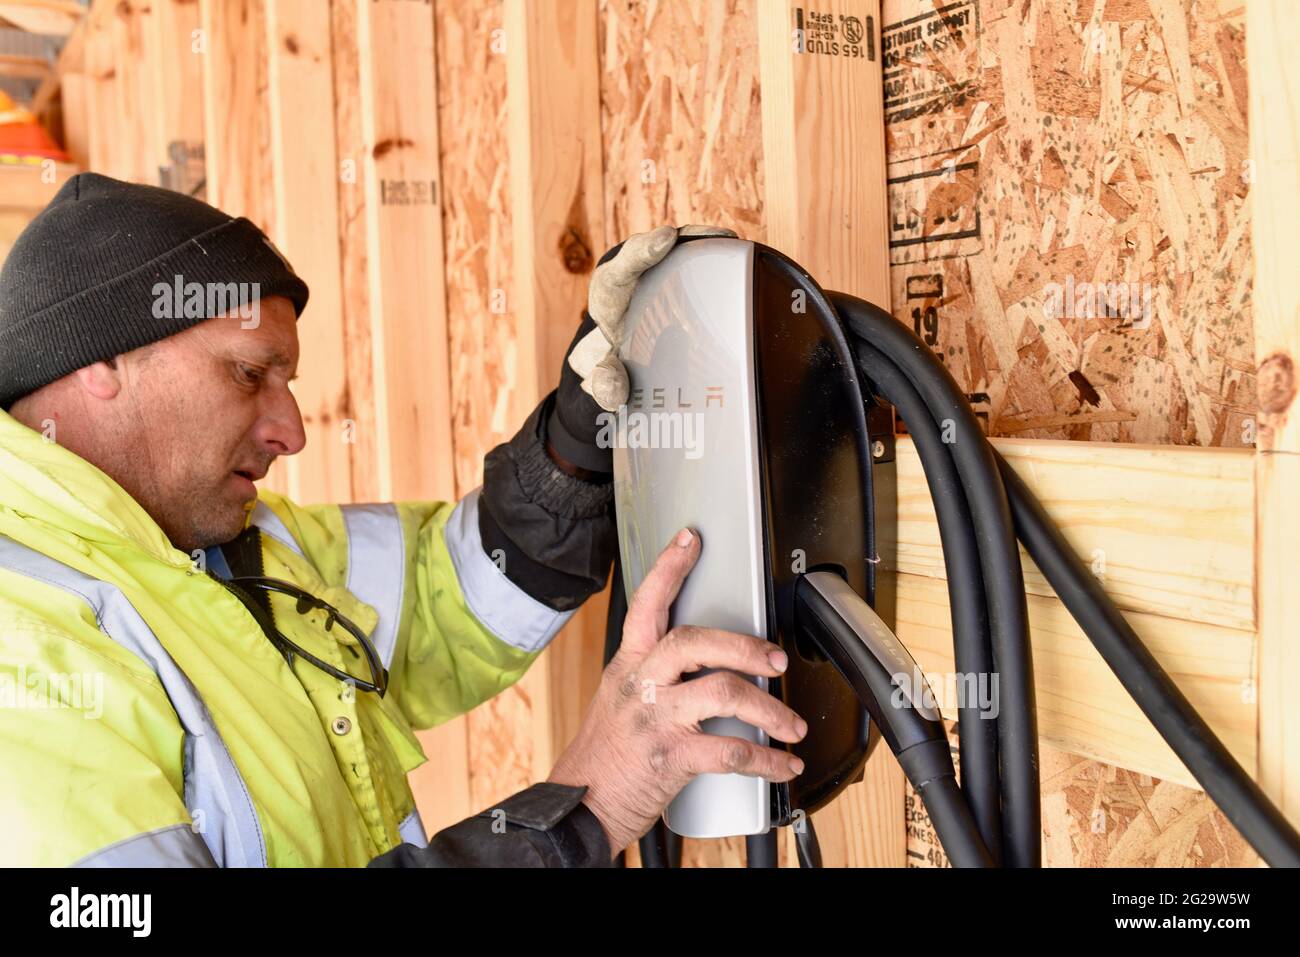 Electrician installing Tesla Charger mounted inside garage at private residence used for recharging Tesla electric vehicles, Browntown WI, USA Stock Photo